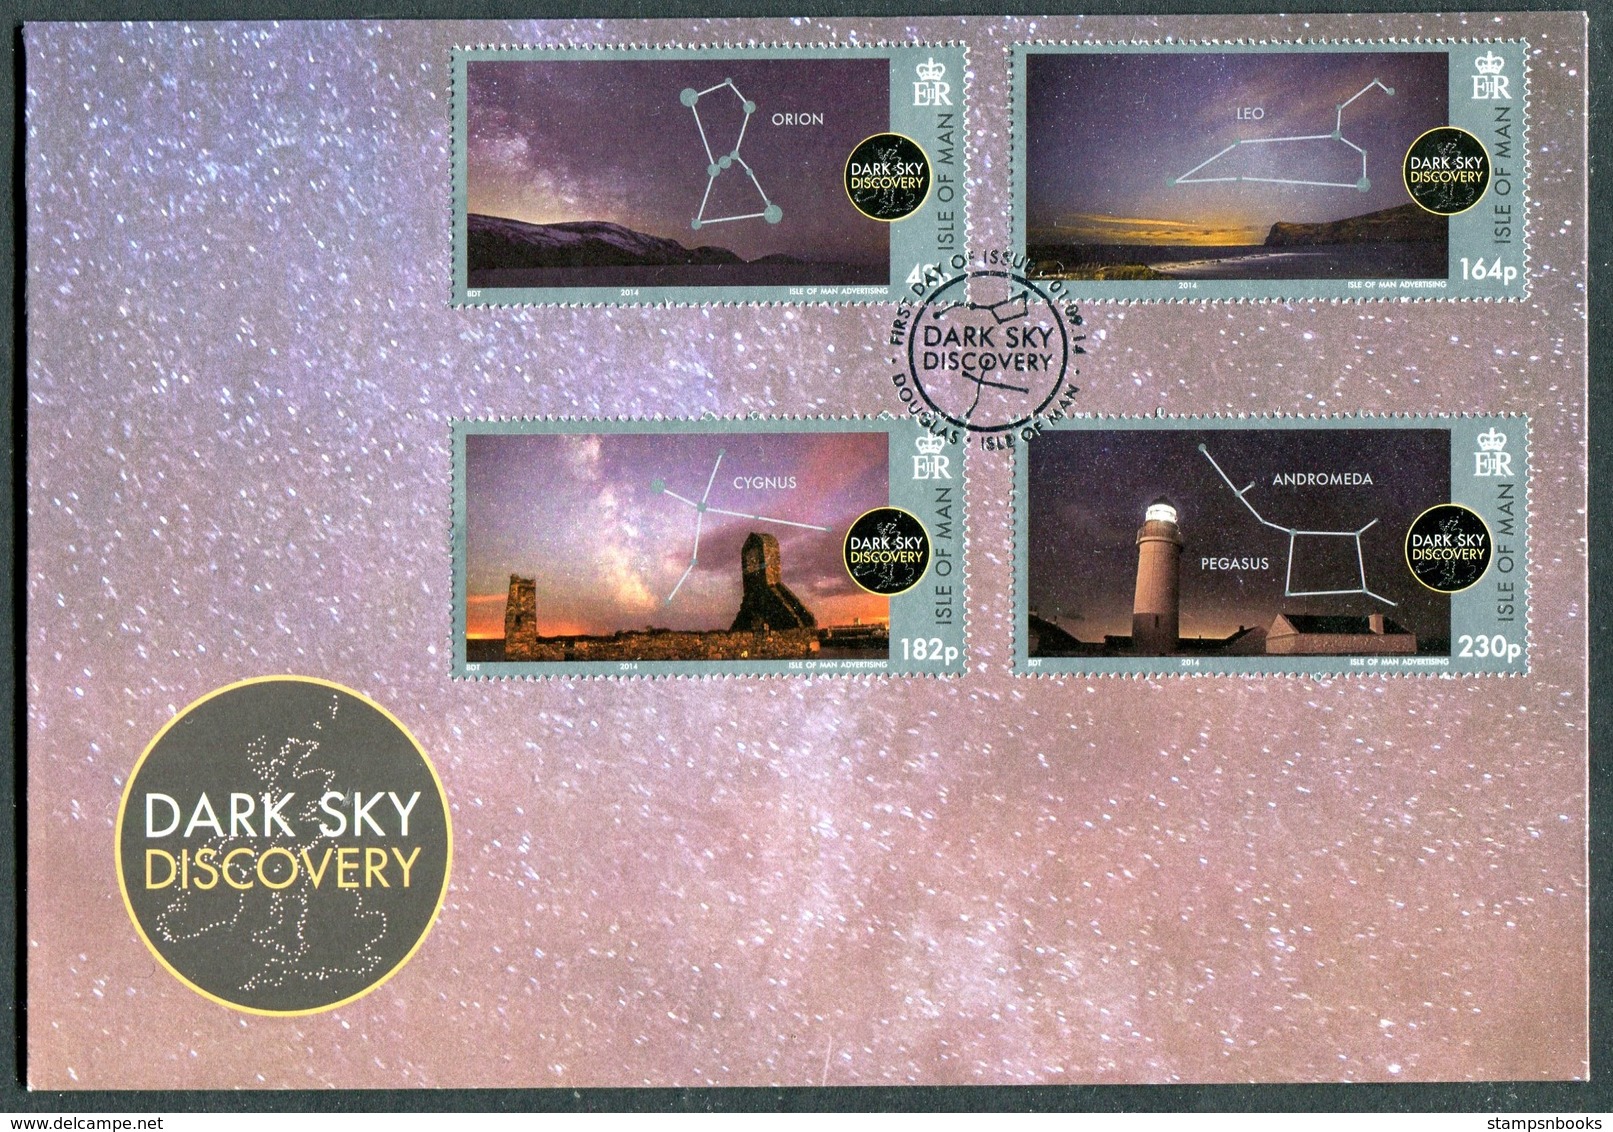 2014 Isle Of Man FDC / I.O.M. First Day Cover. Dark Sky Discovery / Astronomy. Orion Leo Cygus Andromeda Pegasus - Isle Of Man